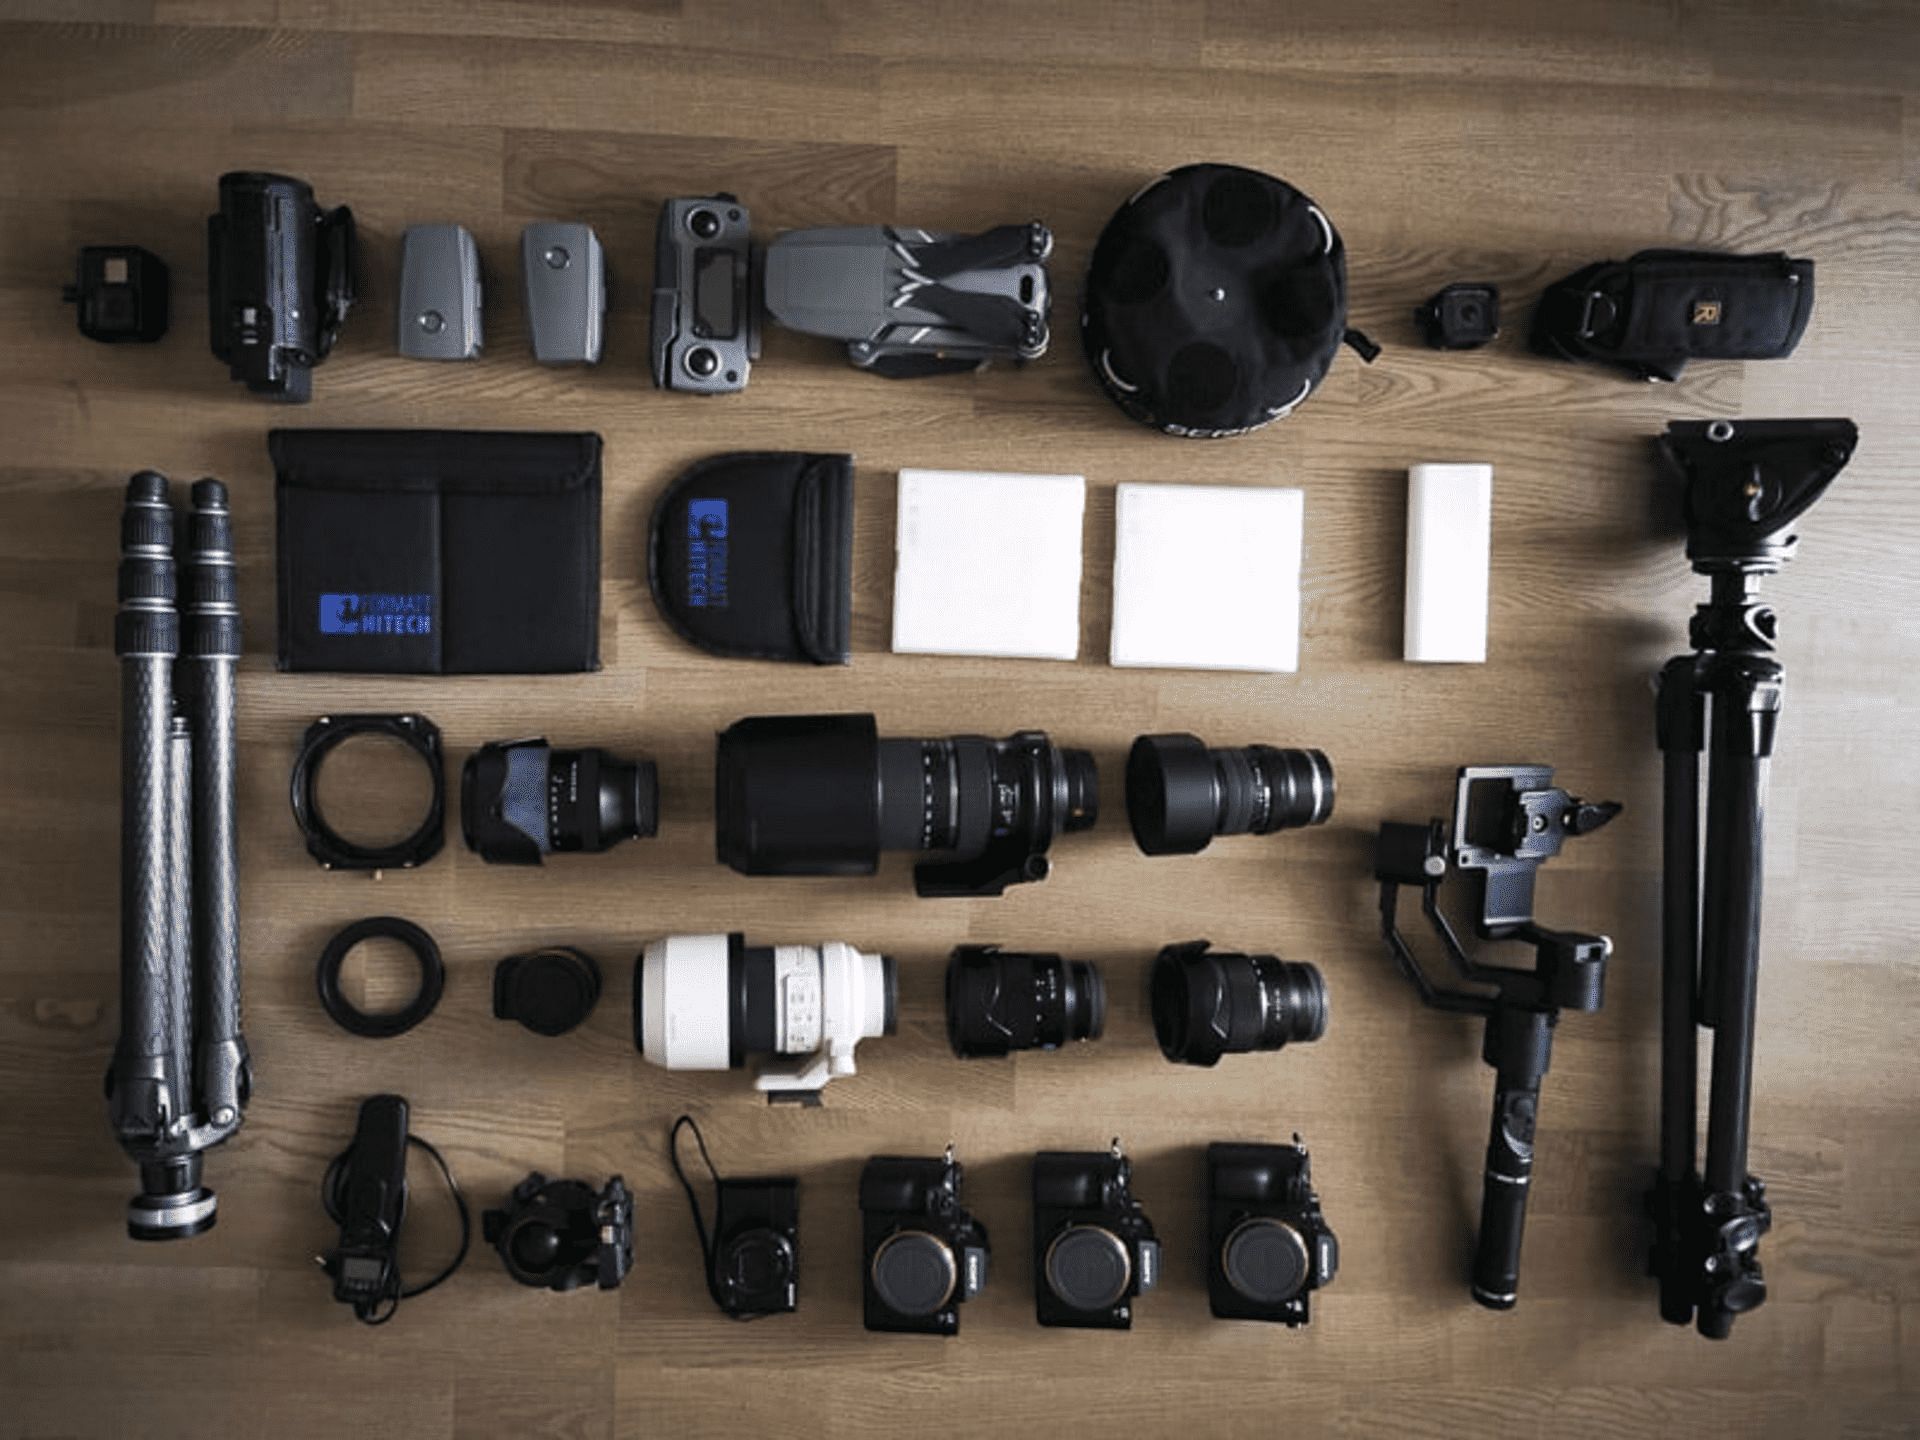 Assortment of Photography Gear, Image Sourced via The Planet D